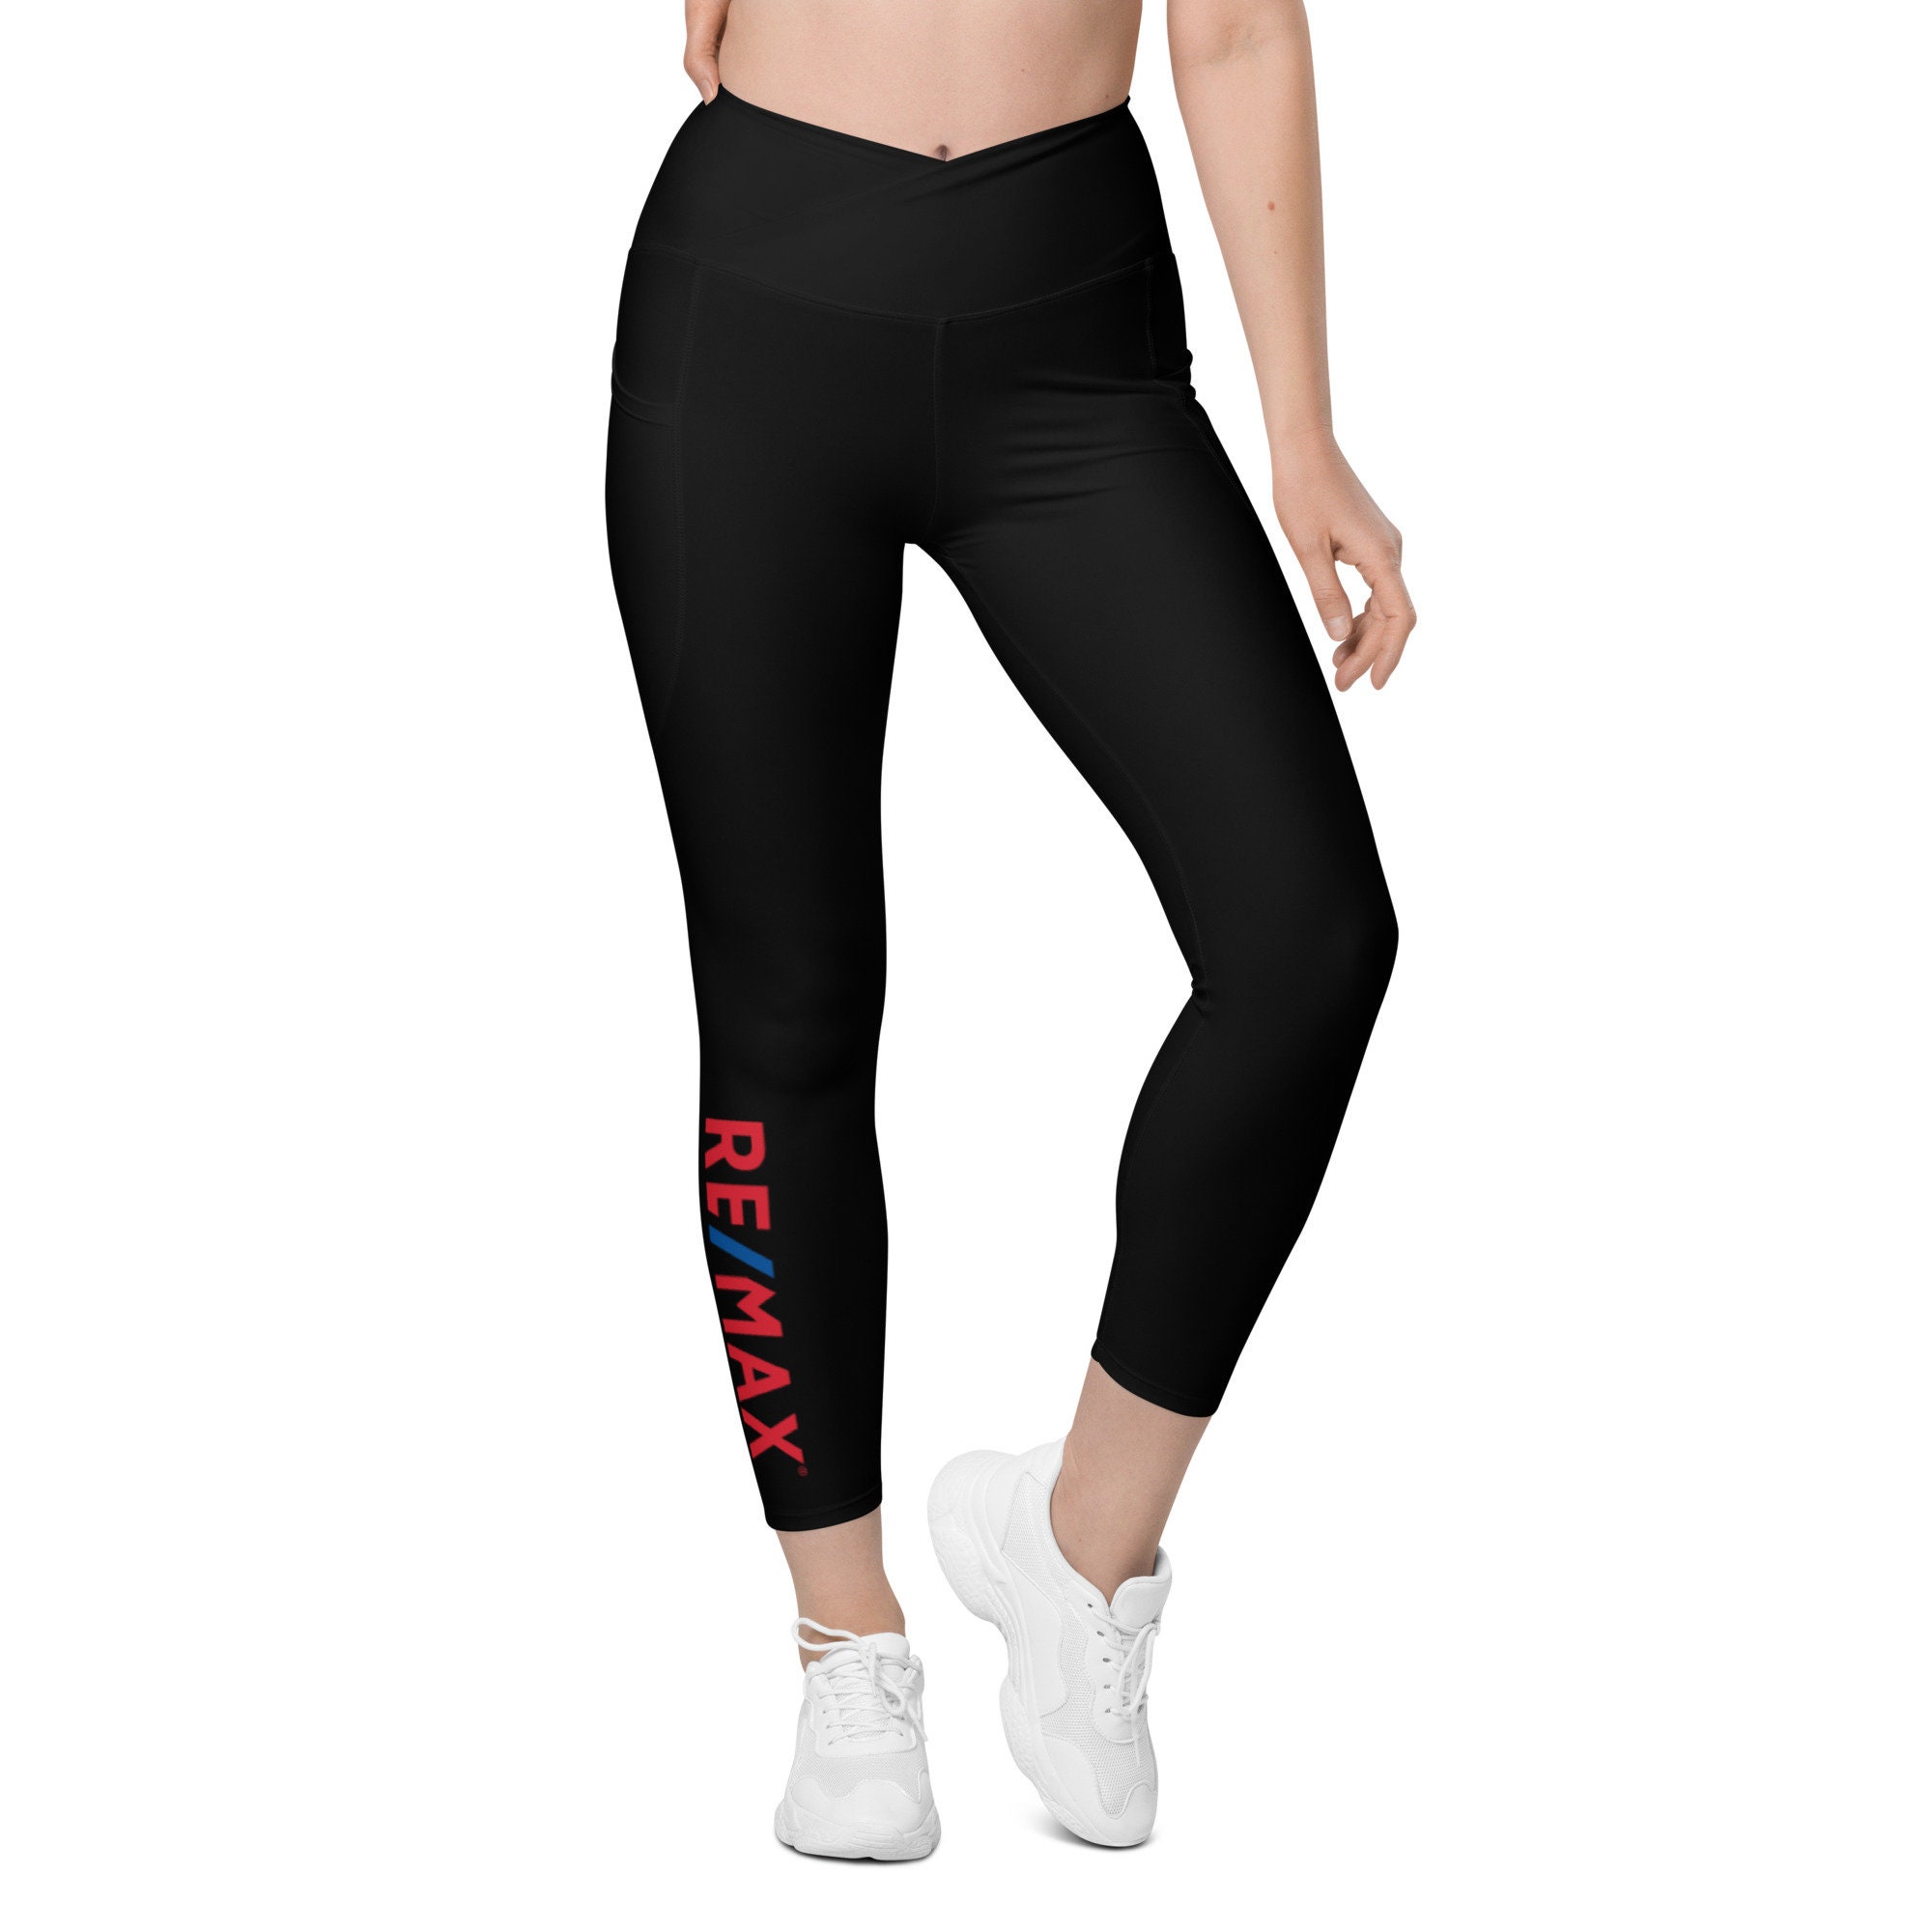 RE/MAX Crossover Leggings With Pockets, REMAX Realty Leggings, Remax Yoga  Pants, Remax Athletic Leggings, Remax Leggings, Realtor Leggings 